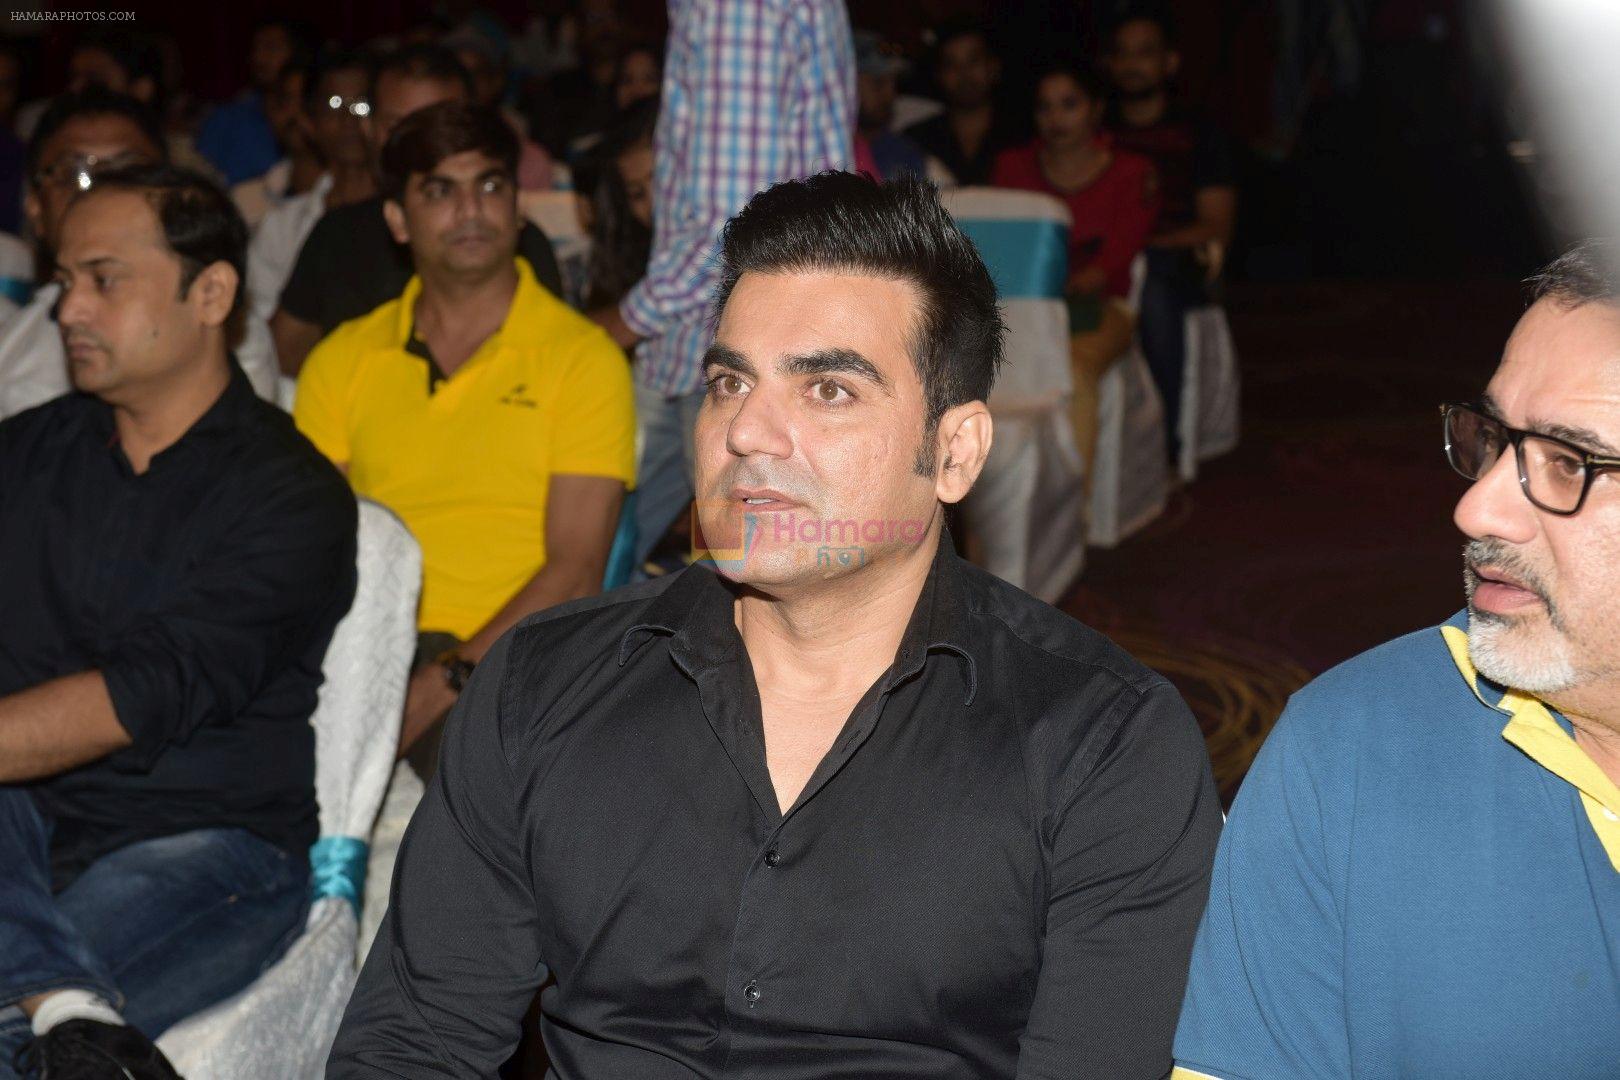 Arbaaz Khan at The Music Launch Of Film Krina on 4th Oct 2017